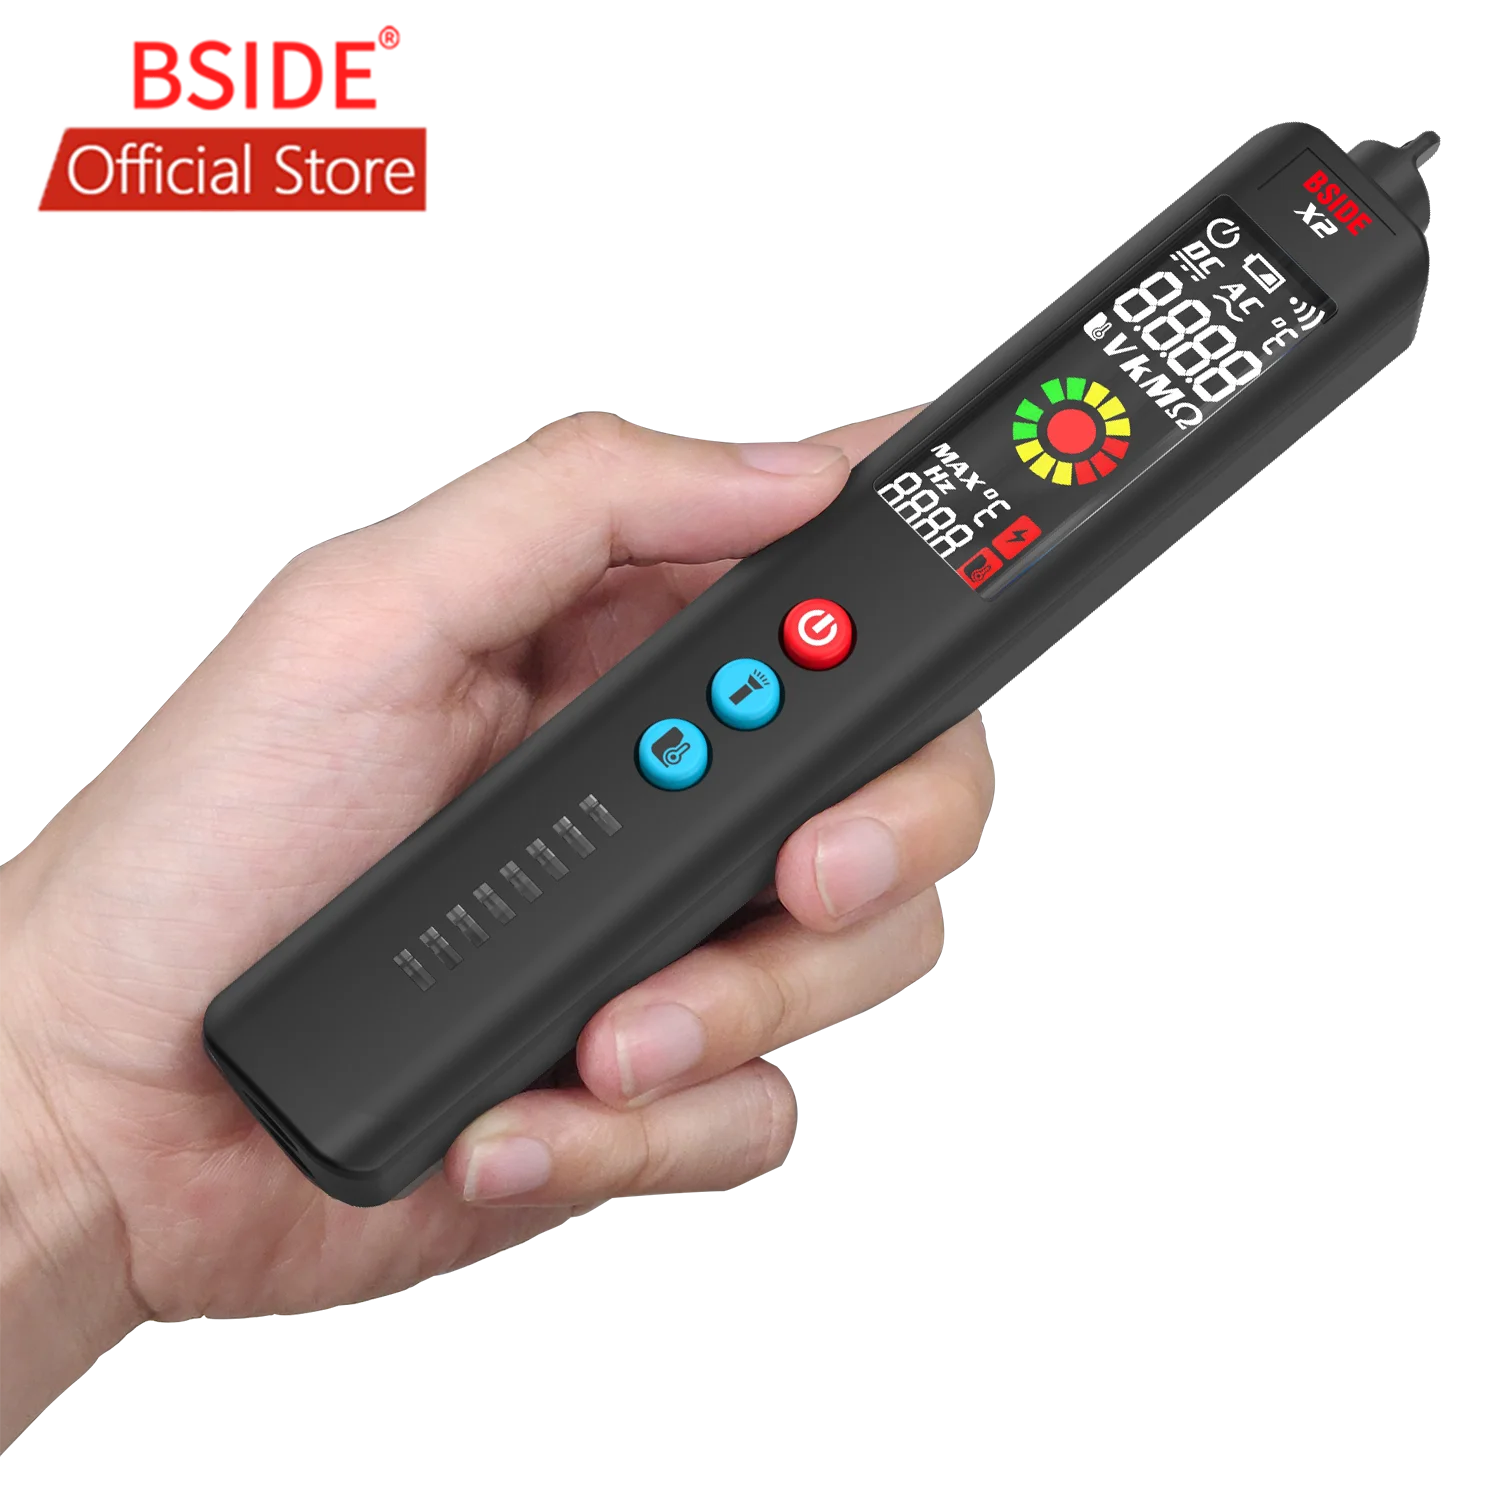 BSIDE Upgraded Voltage Tester, Color LCD 3-Result Display Voltage Detector with Infrared Thermometer for BBQ with EVA Case